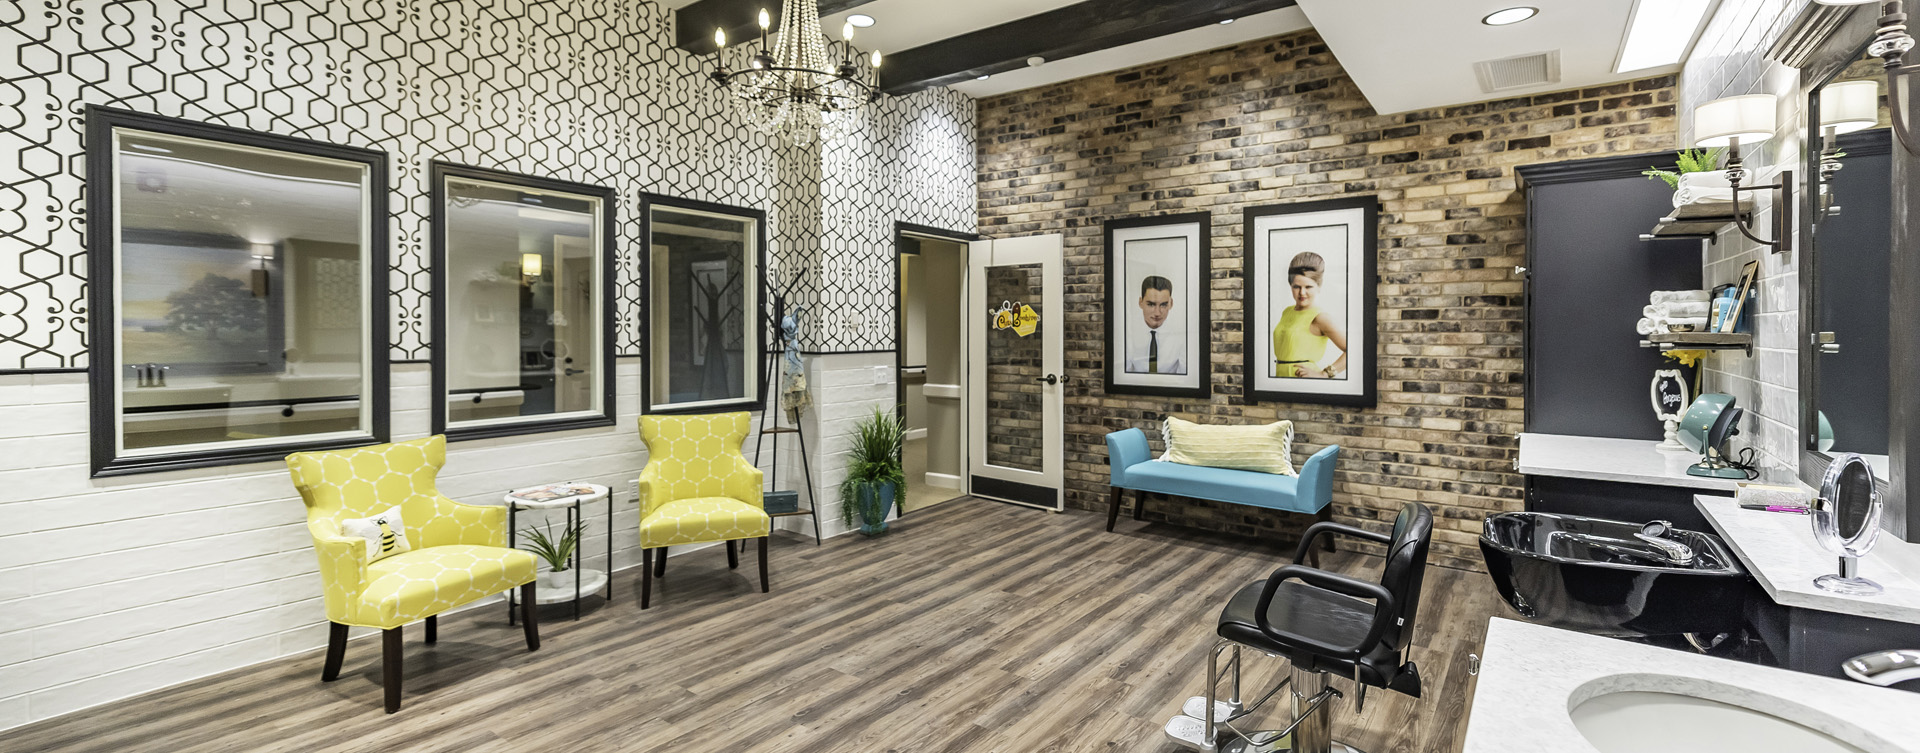 Strut on in and find out what the buzz is all about in the salon at Bickford of Canton